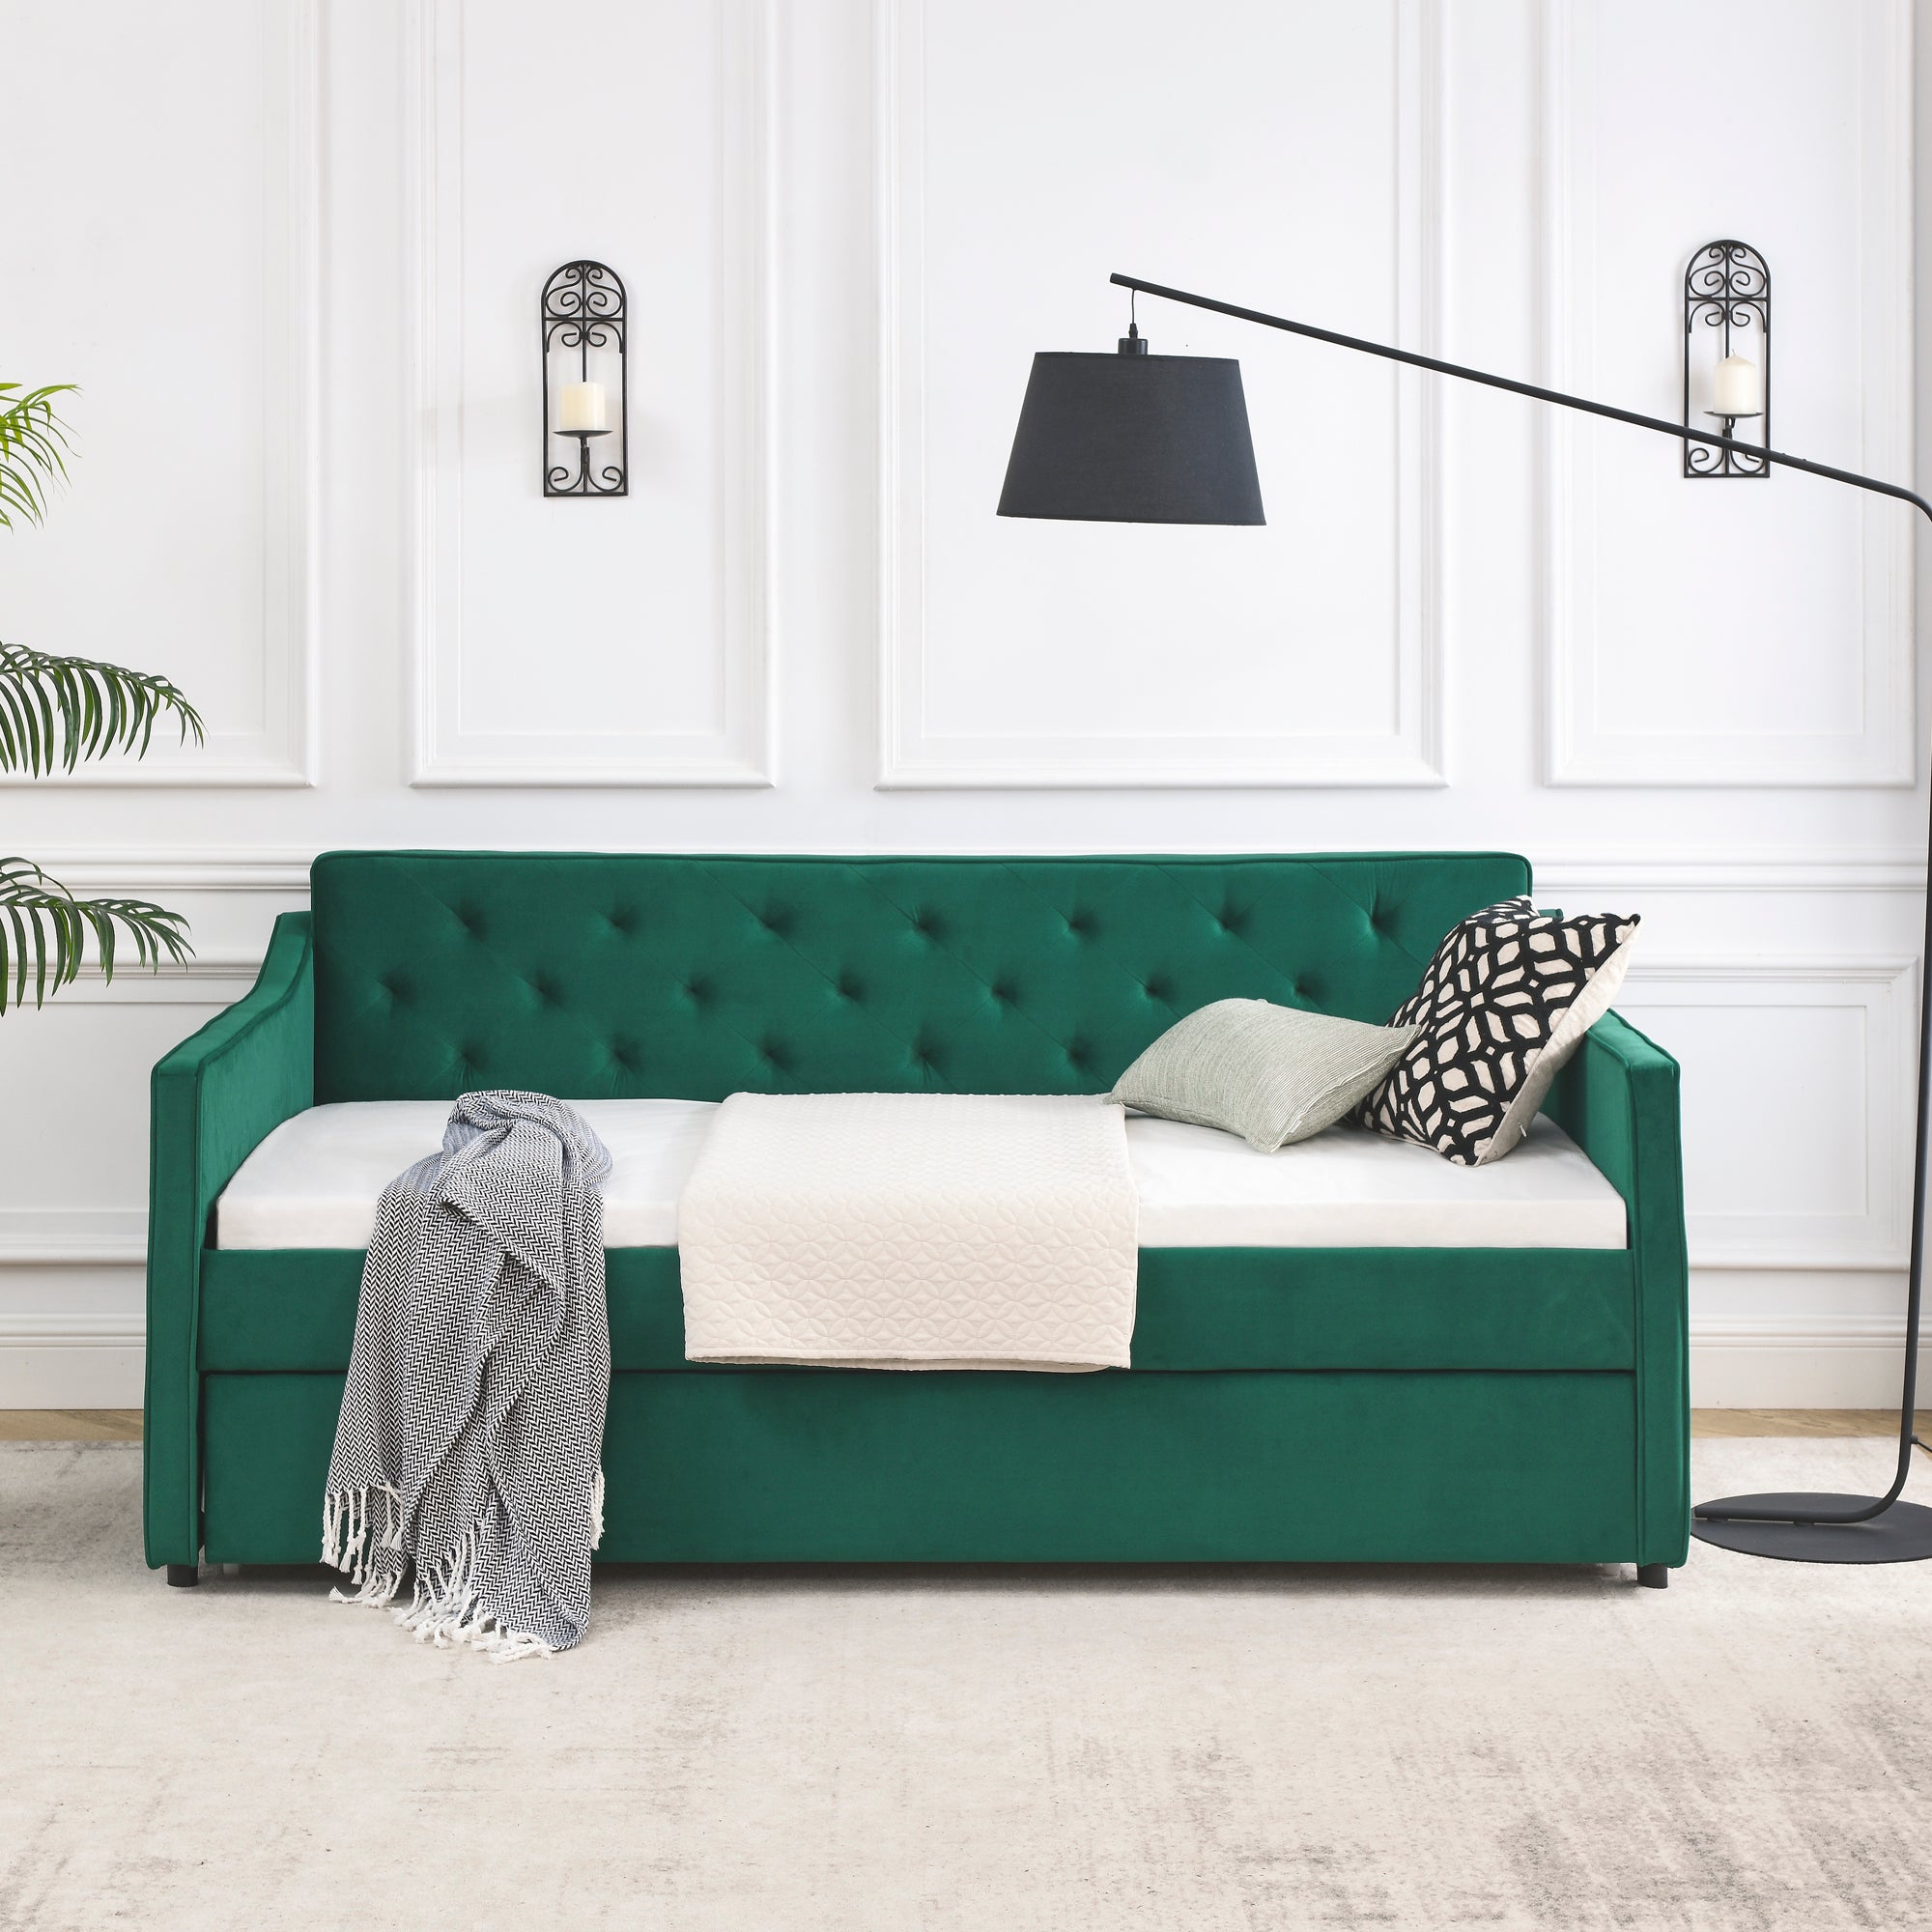 Twin Size Daybed with Twin Size Trundle Upholstered green-velvet